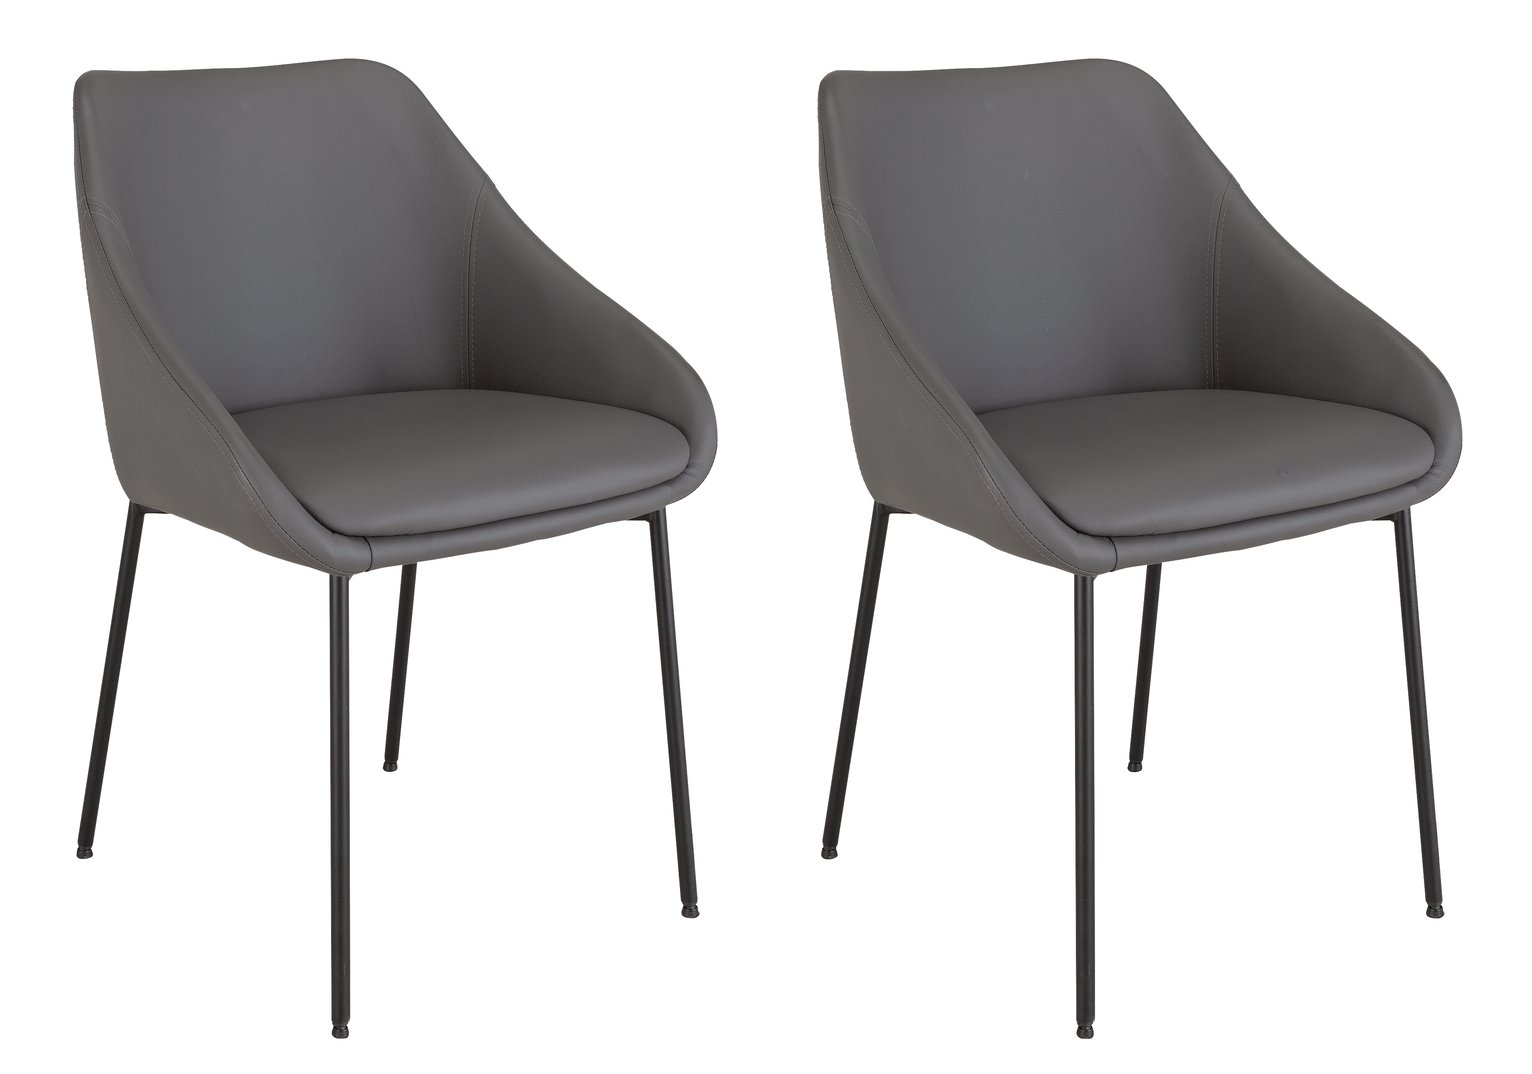 Argos Home Kanso Pair of Faux Leather Dining Chairs - Grey